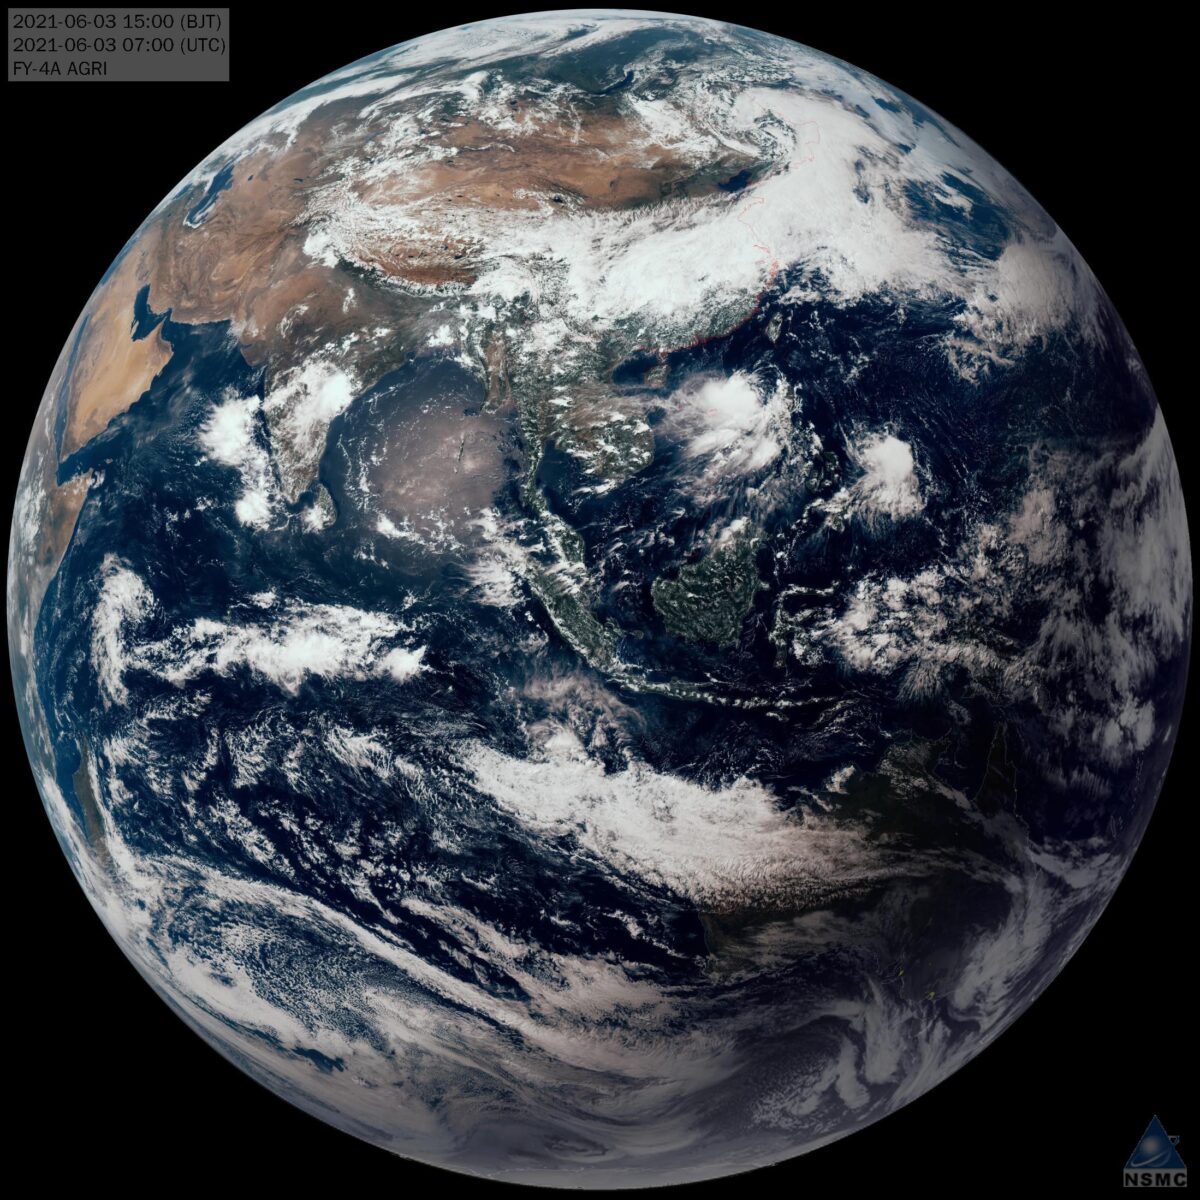 A full disk view from the Fengyun-4A satellite.